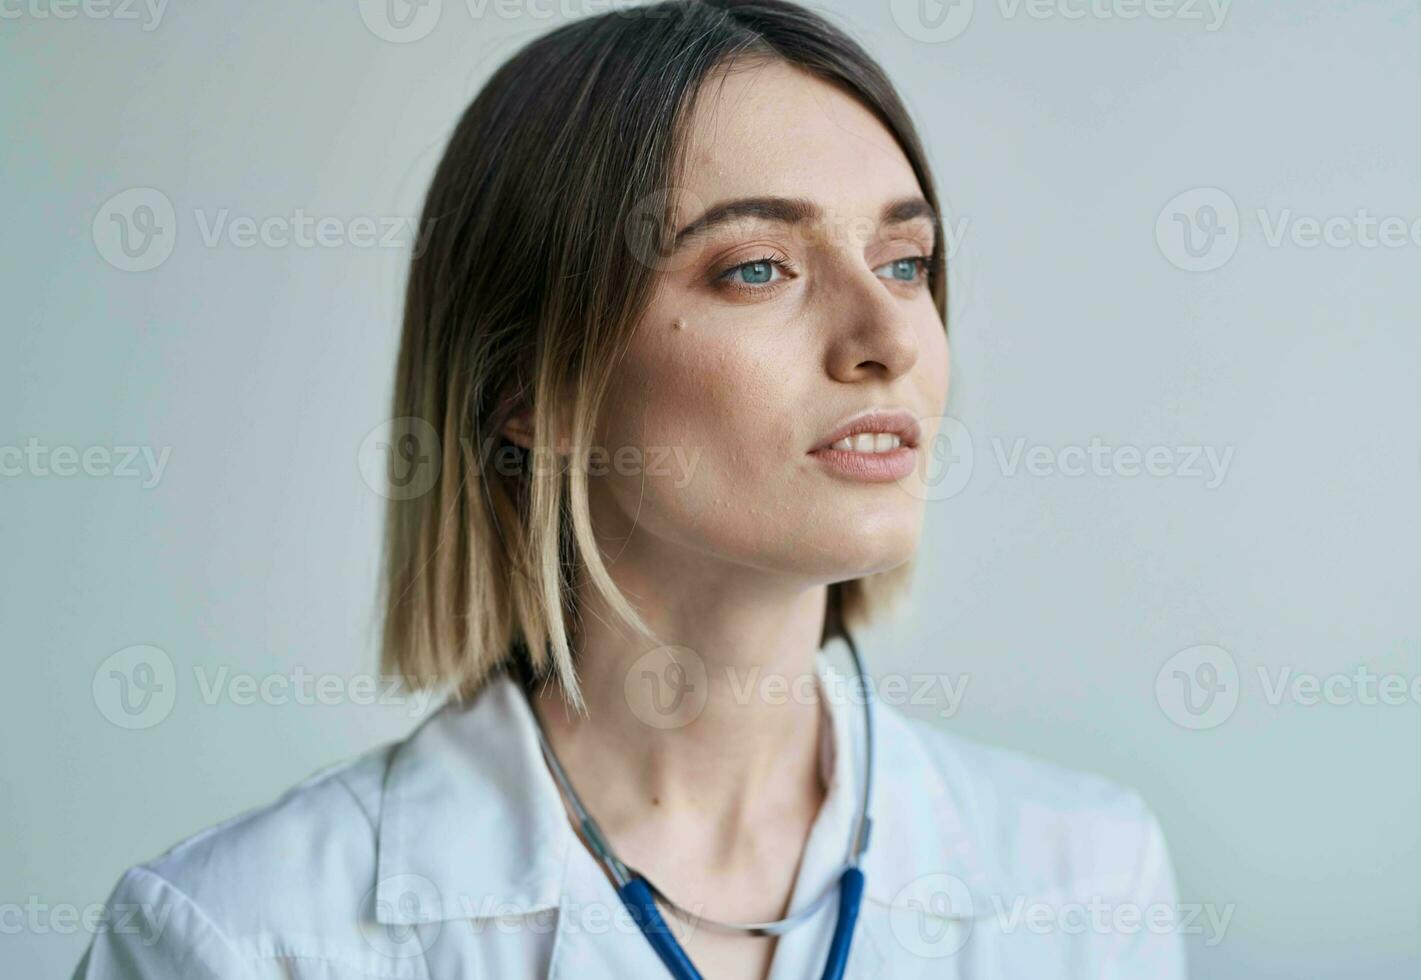 Doctor medical gown nurse stethoscope health light background photo